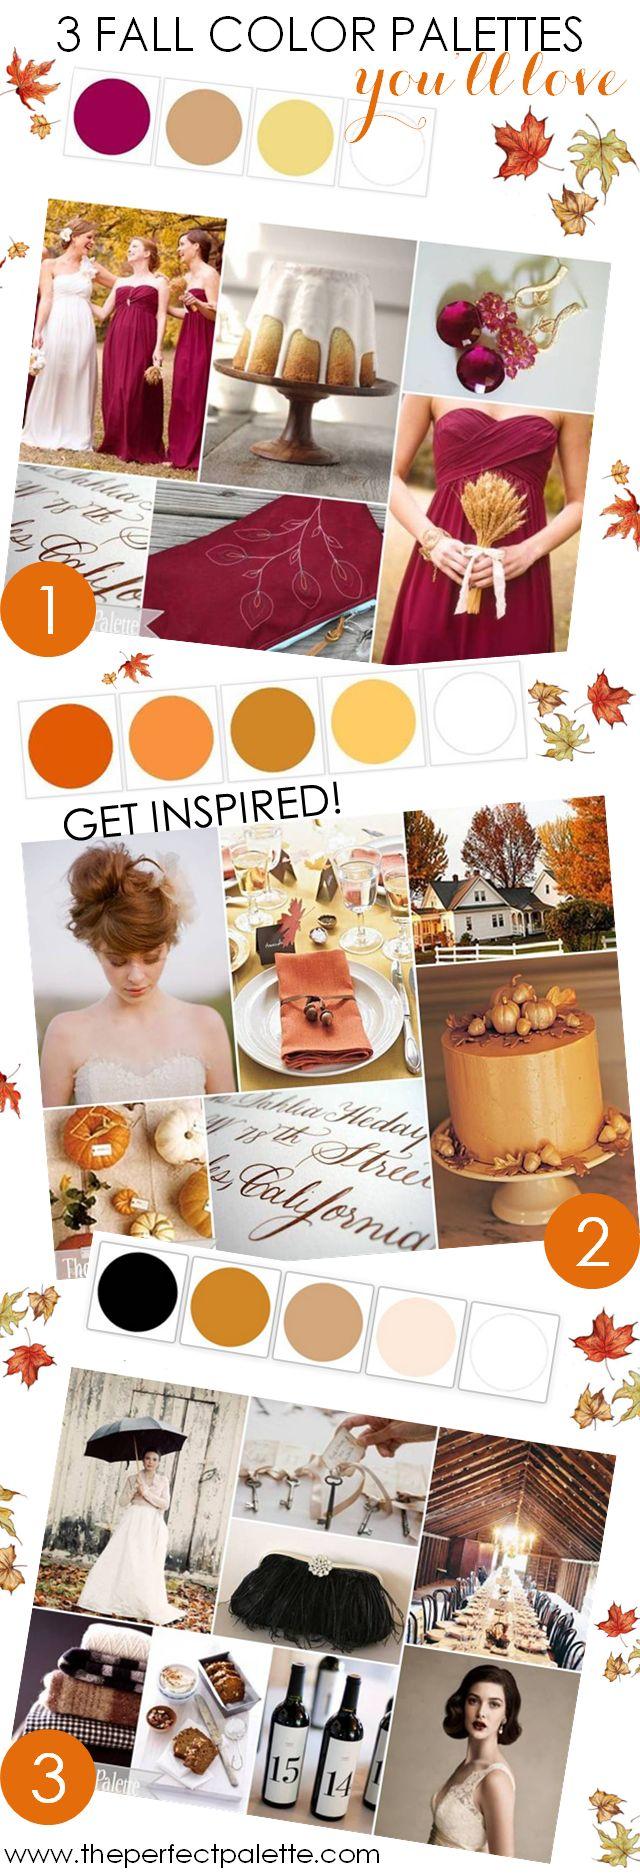 Wedding - 3 Fall Color Palettes You'll Love